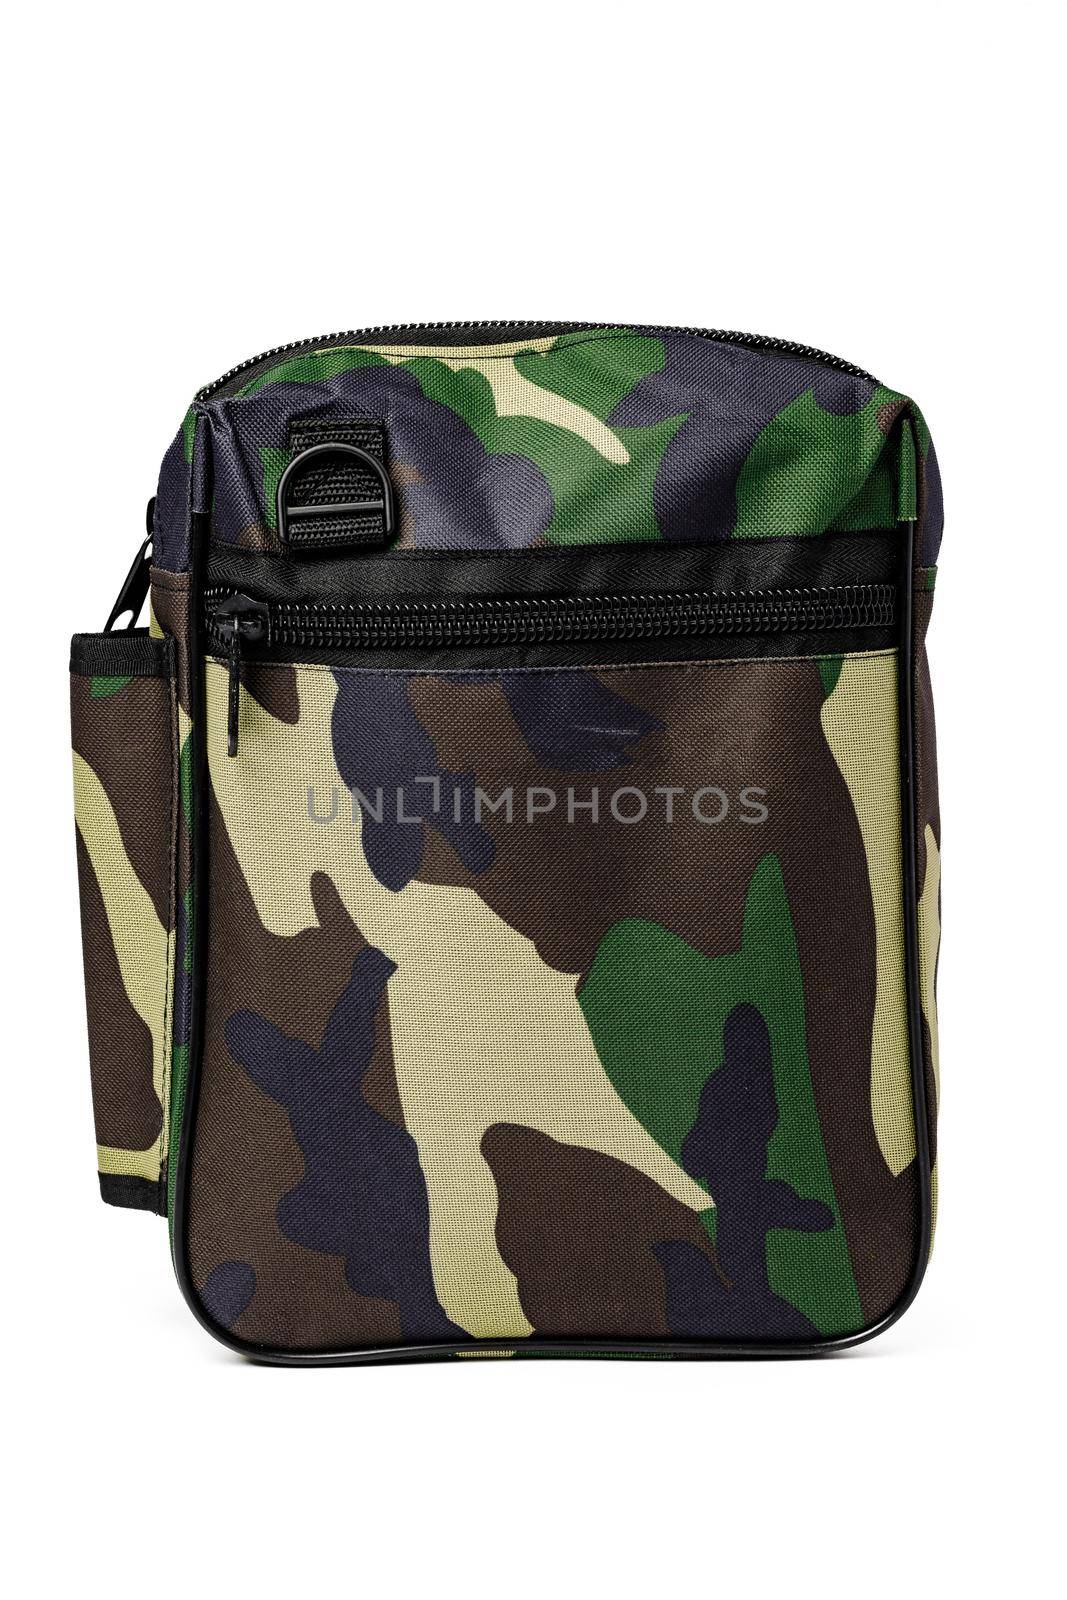 Travel military bag isolated on white background by Fabrikasimf